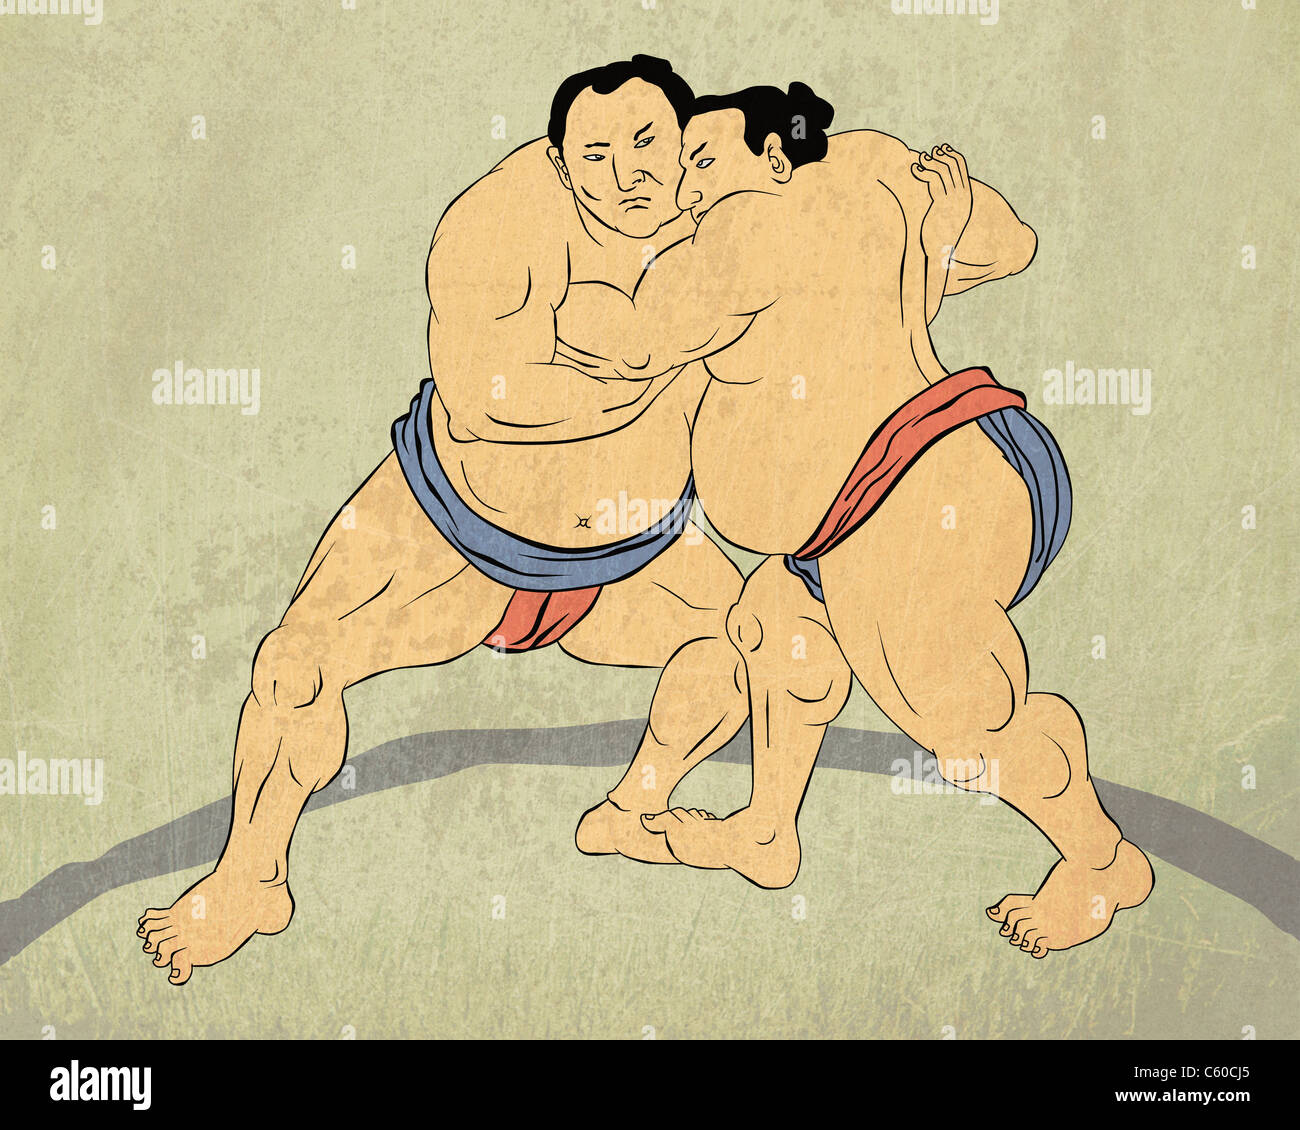 illustration of a two Japanese sumo wrestler wrestling isolated done in Japanese wood block print style Stock Photo